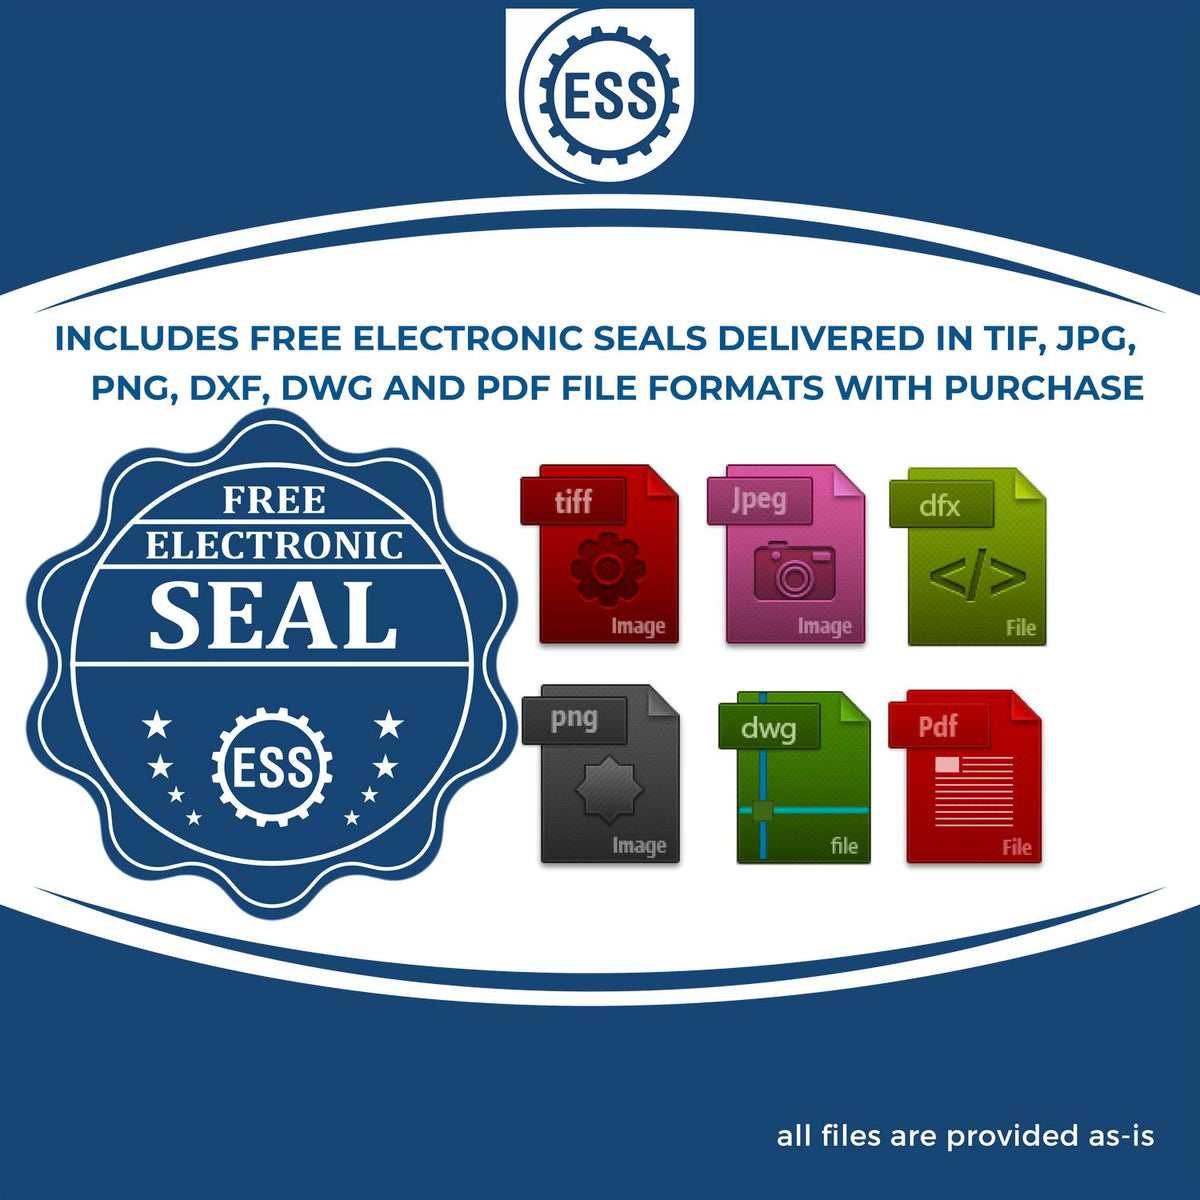 An infographic for the free electronic seal for the Extended Long Reach Arizona Architect Seal Embosser illustrating the different file type icons such as DXF, DWG, TIF, JPG and PNG.